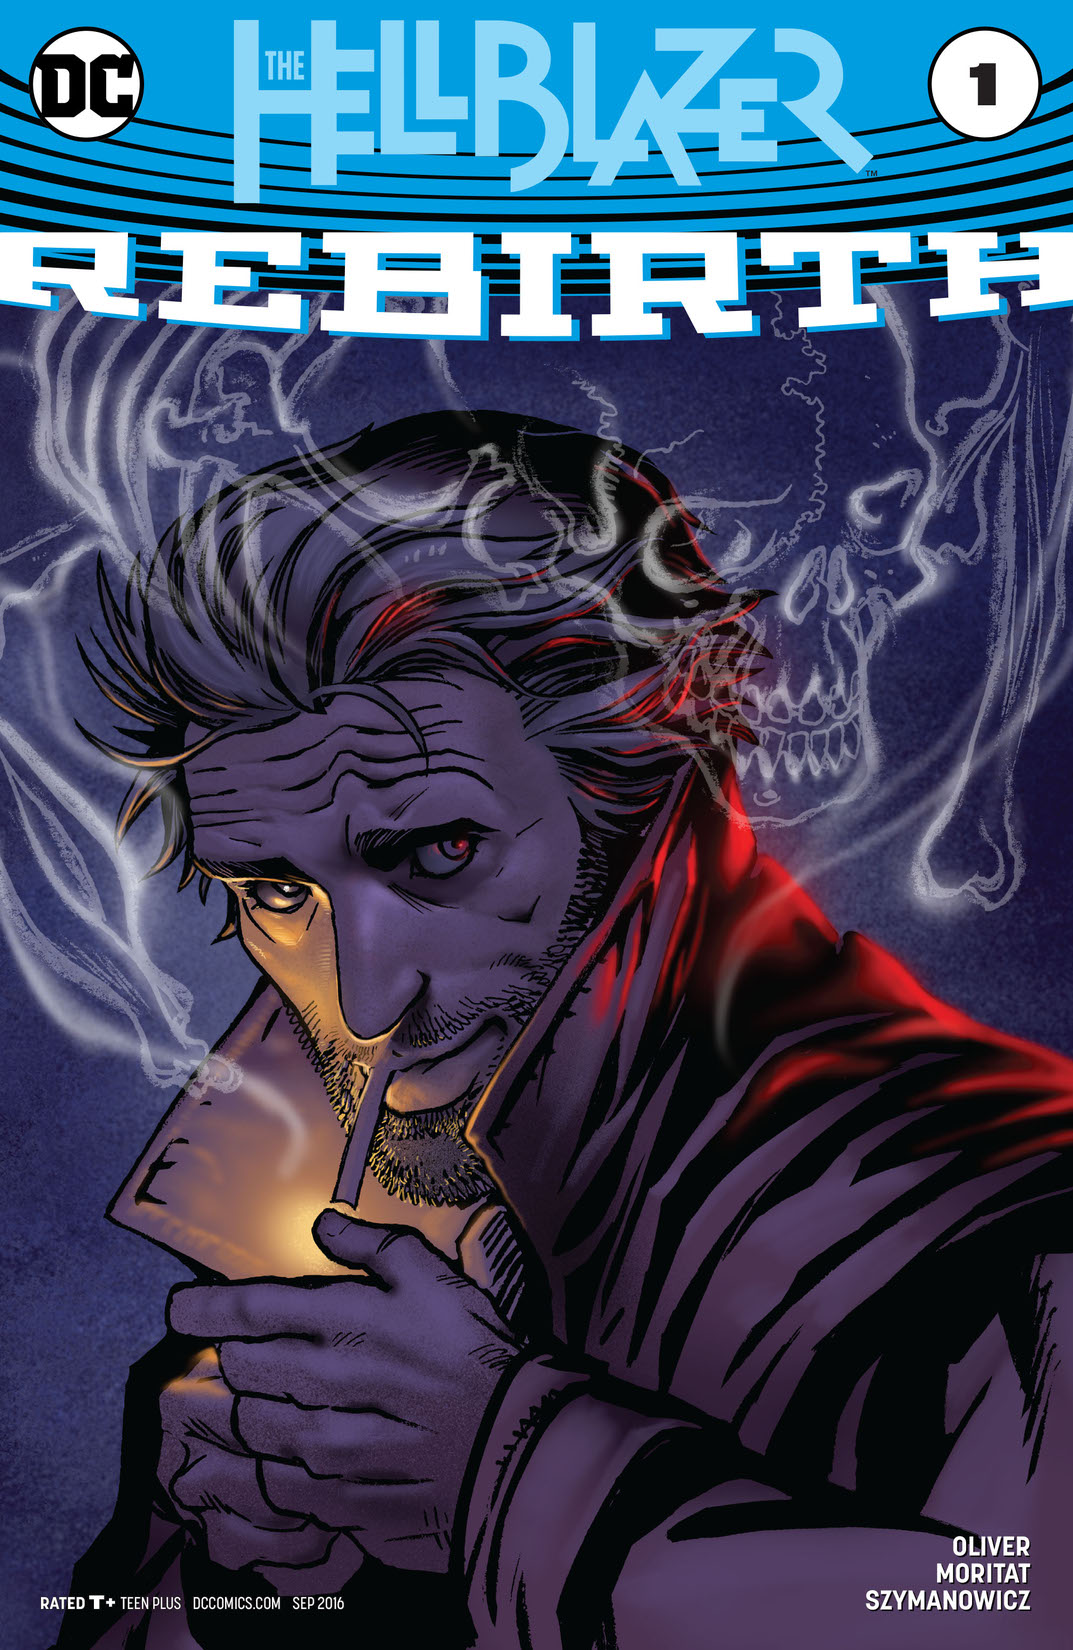 The Hellblazer: Rebirth #1 preview images